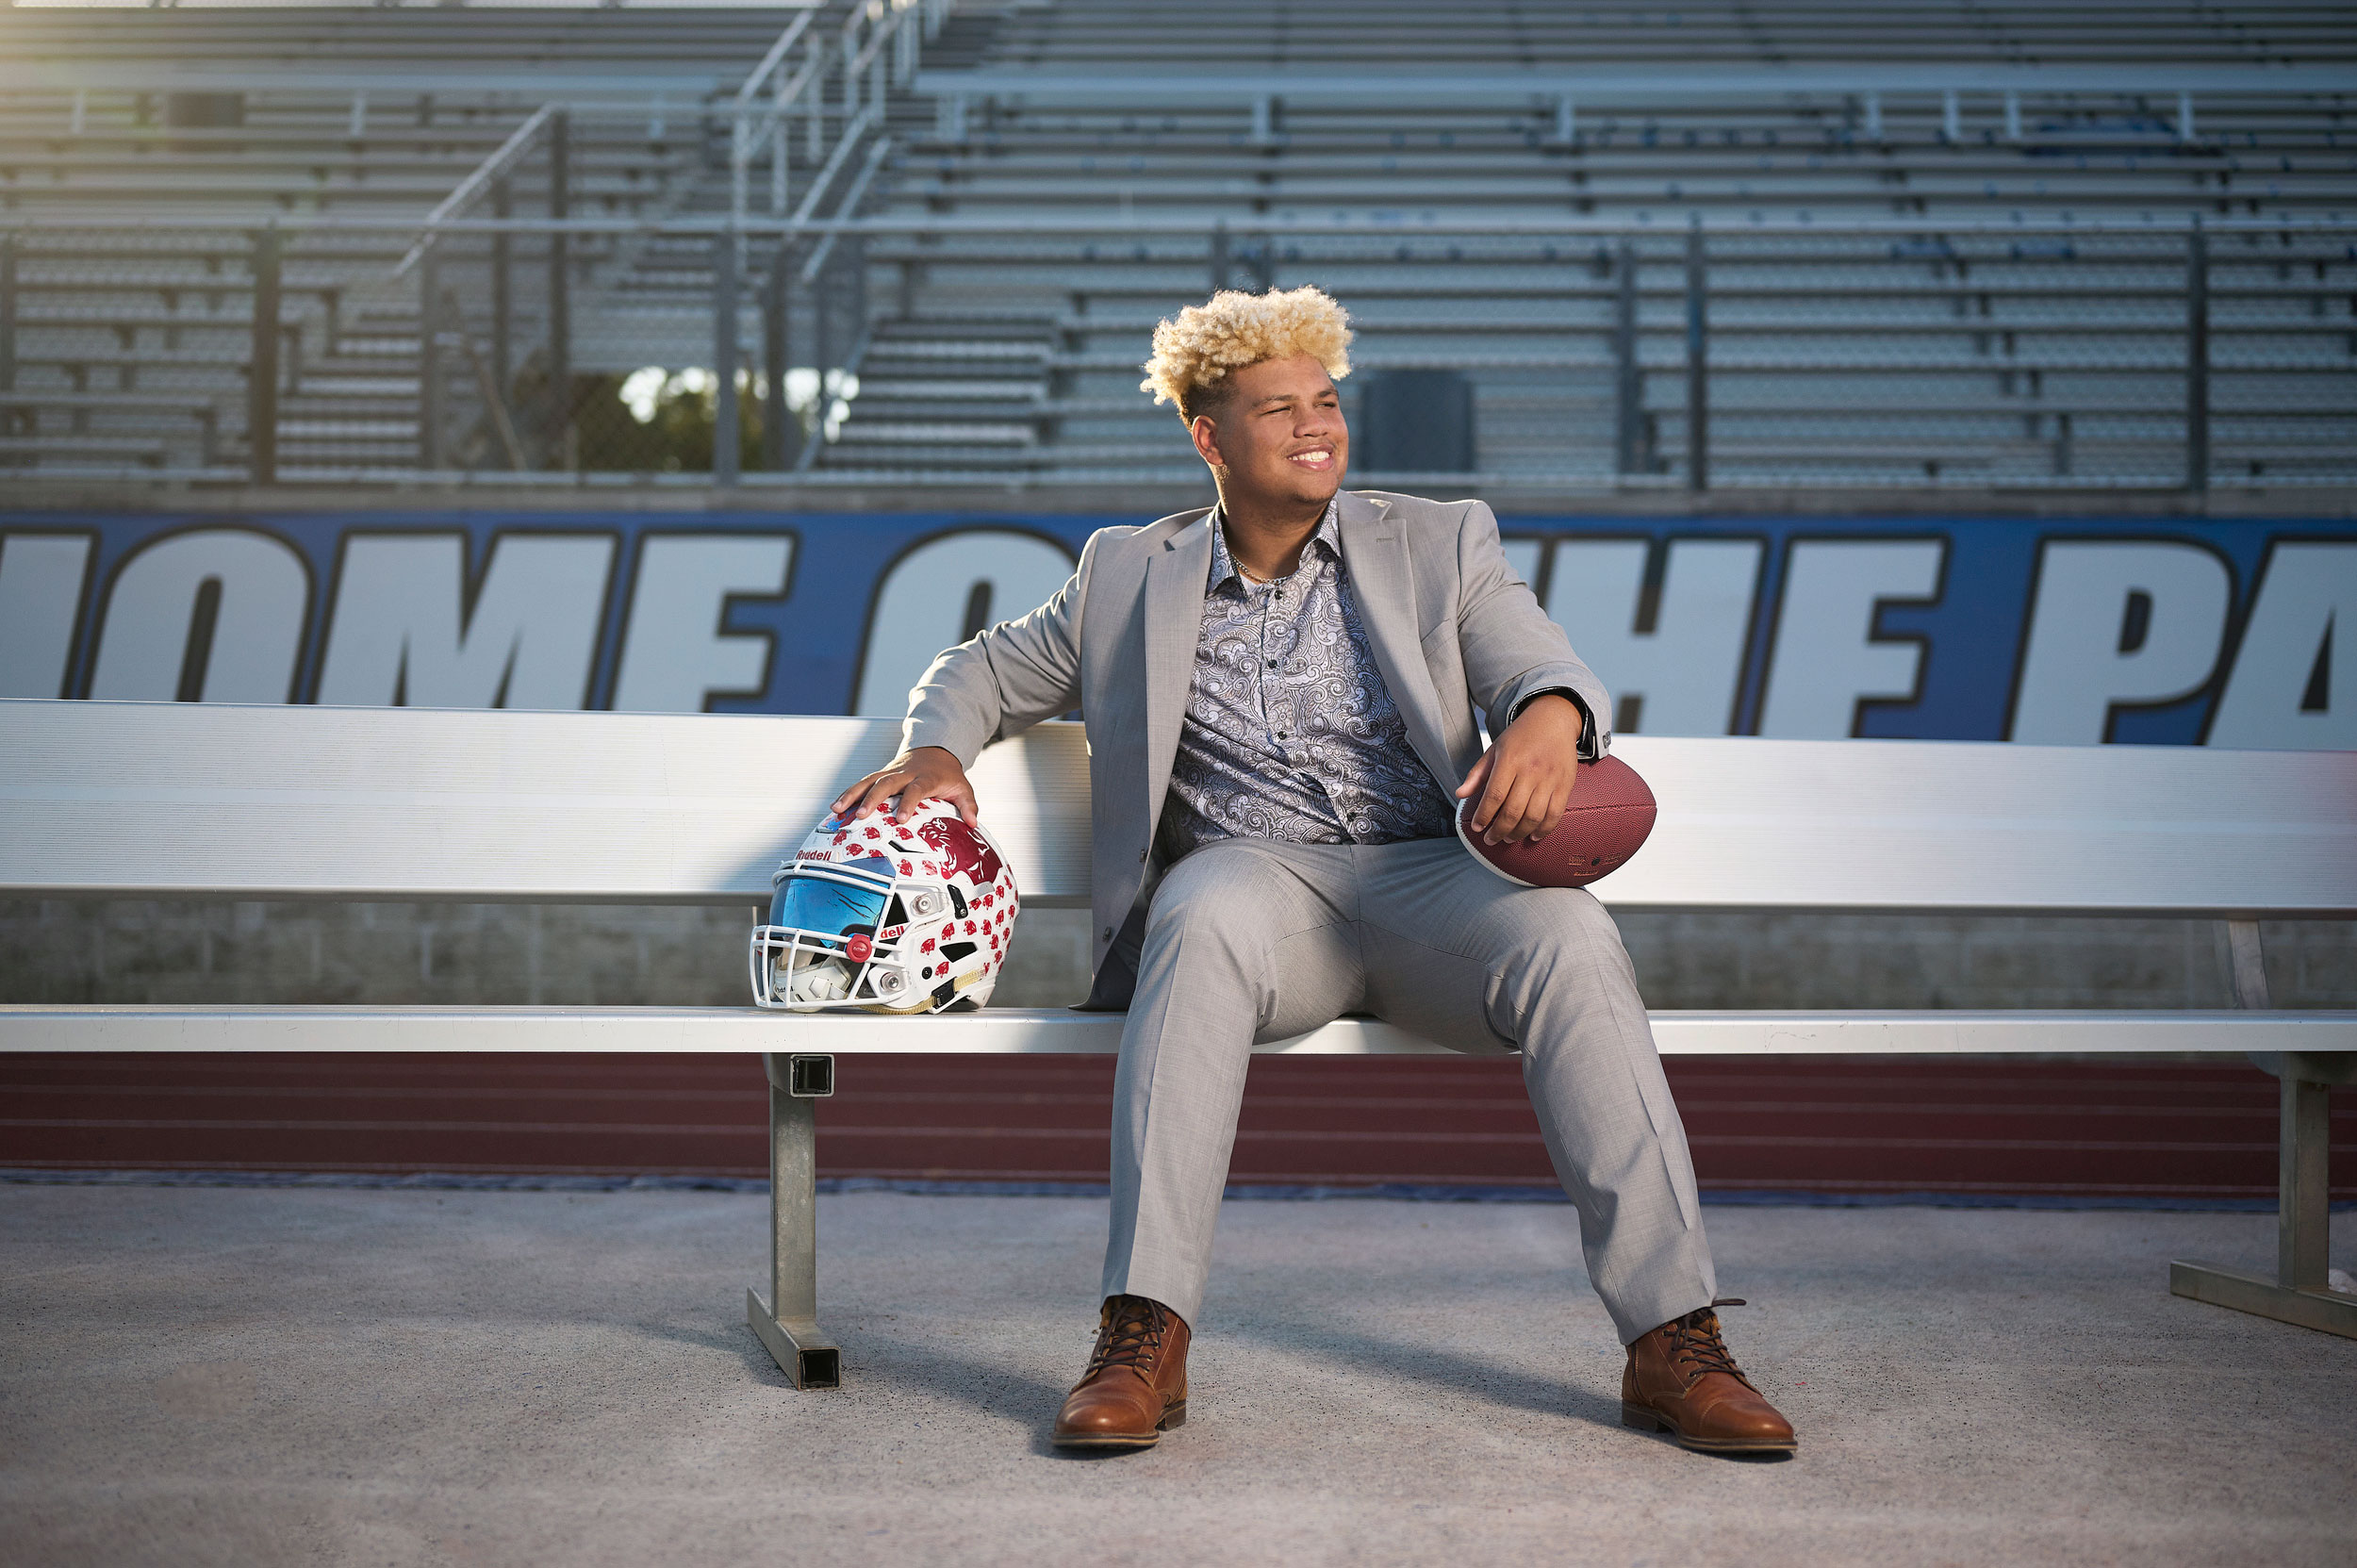 Dallas Episcopal Football Senior Pictures With Helmet